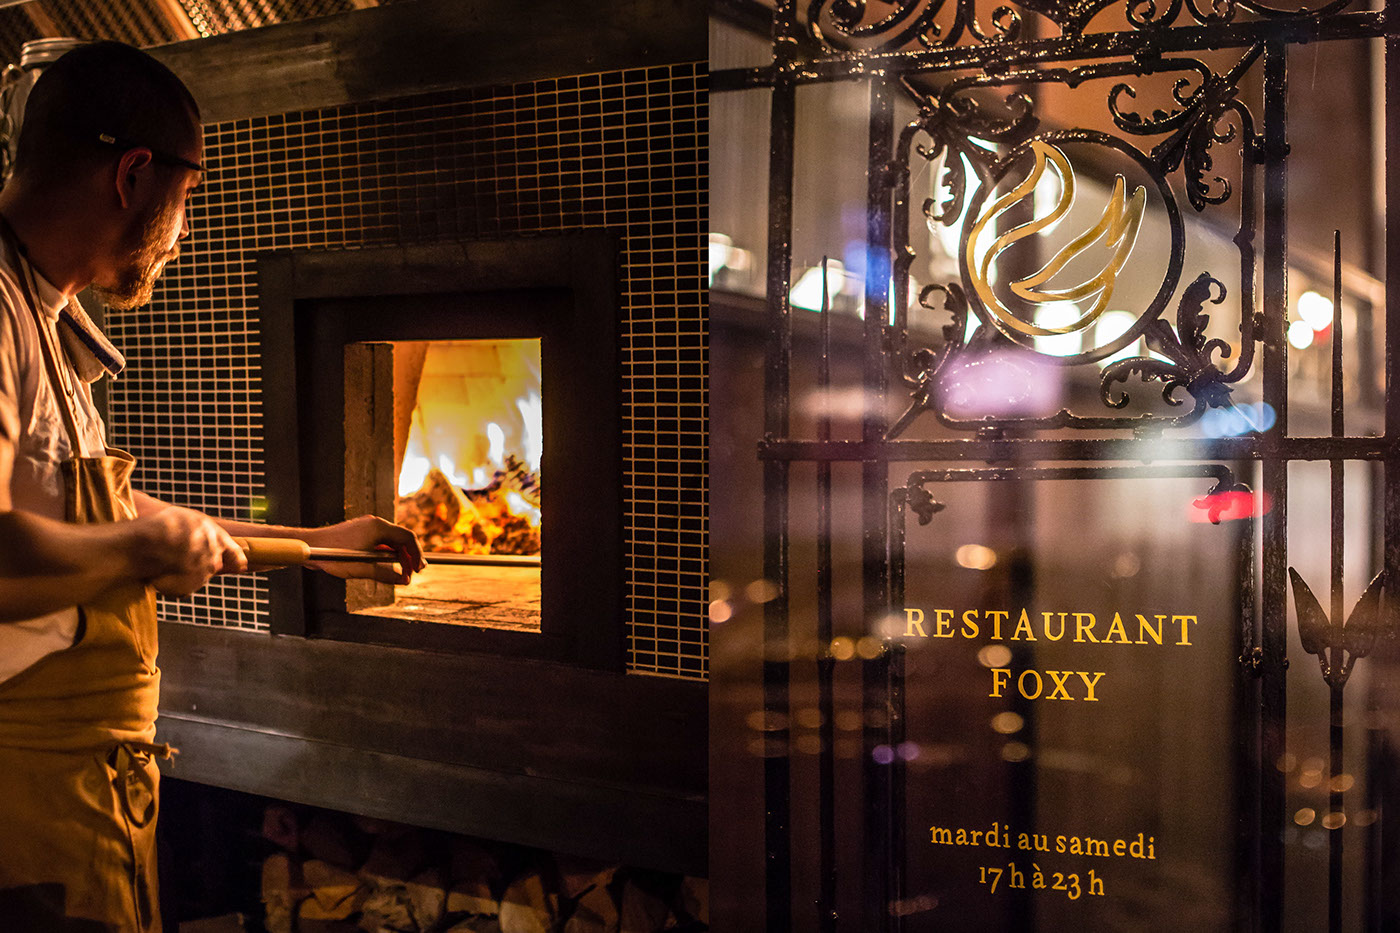 restaurant Montreal fire sign FOX Foxy GRIFFINTOWN